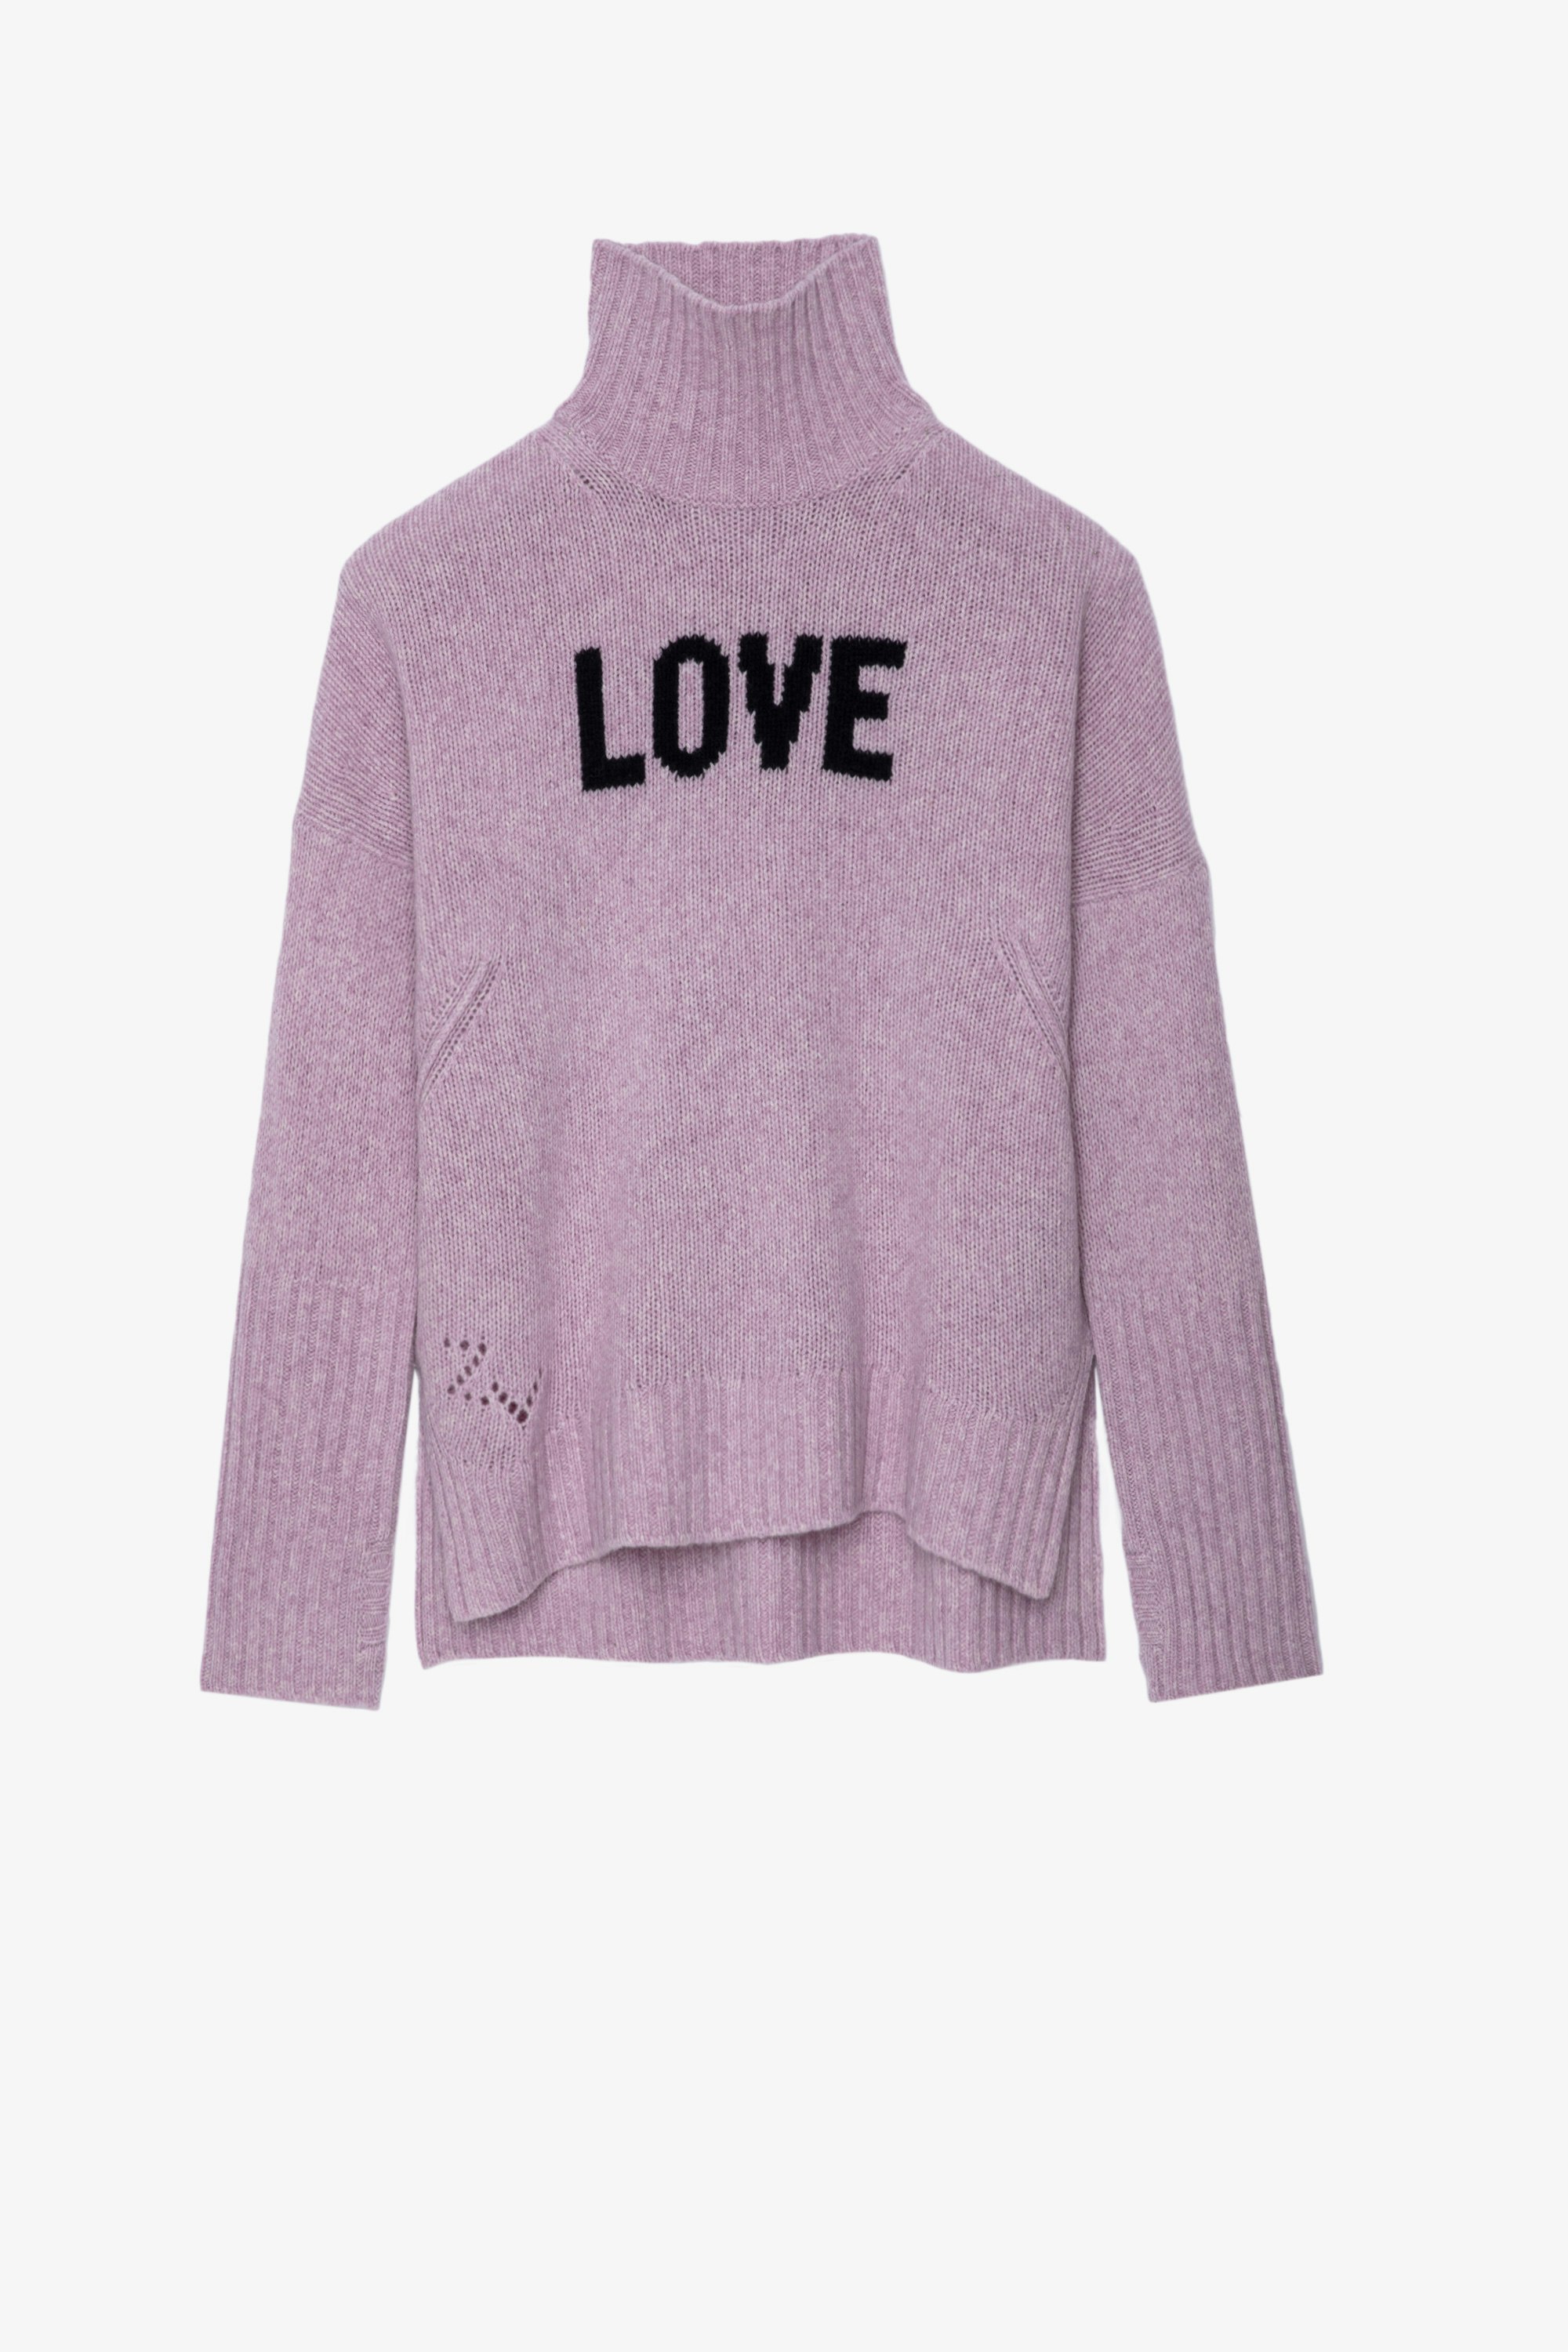 Alma We Love Jumper  Women’s light pink merino knit jumper with contrasting “Love” mantra and high neck